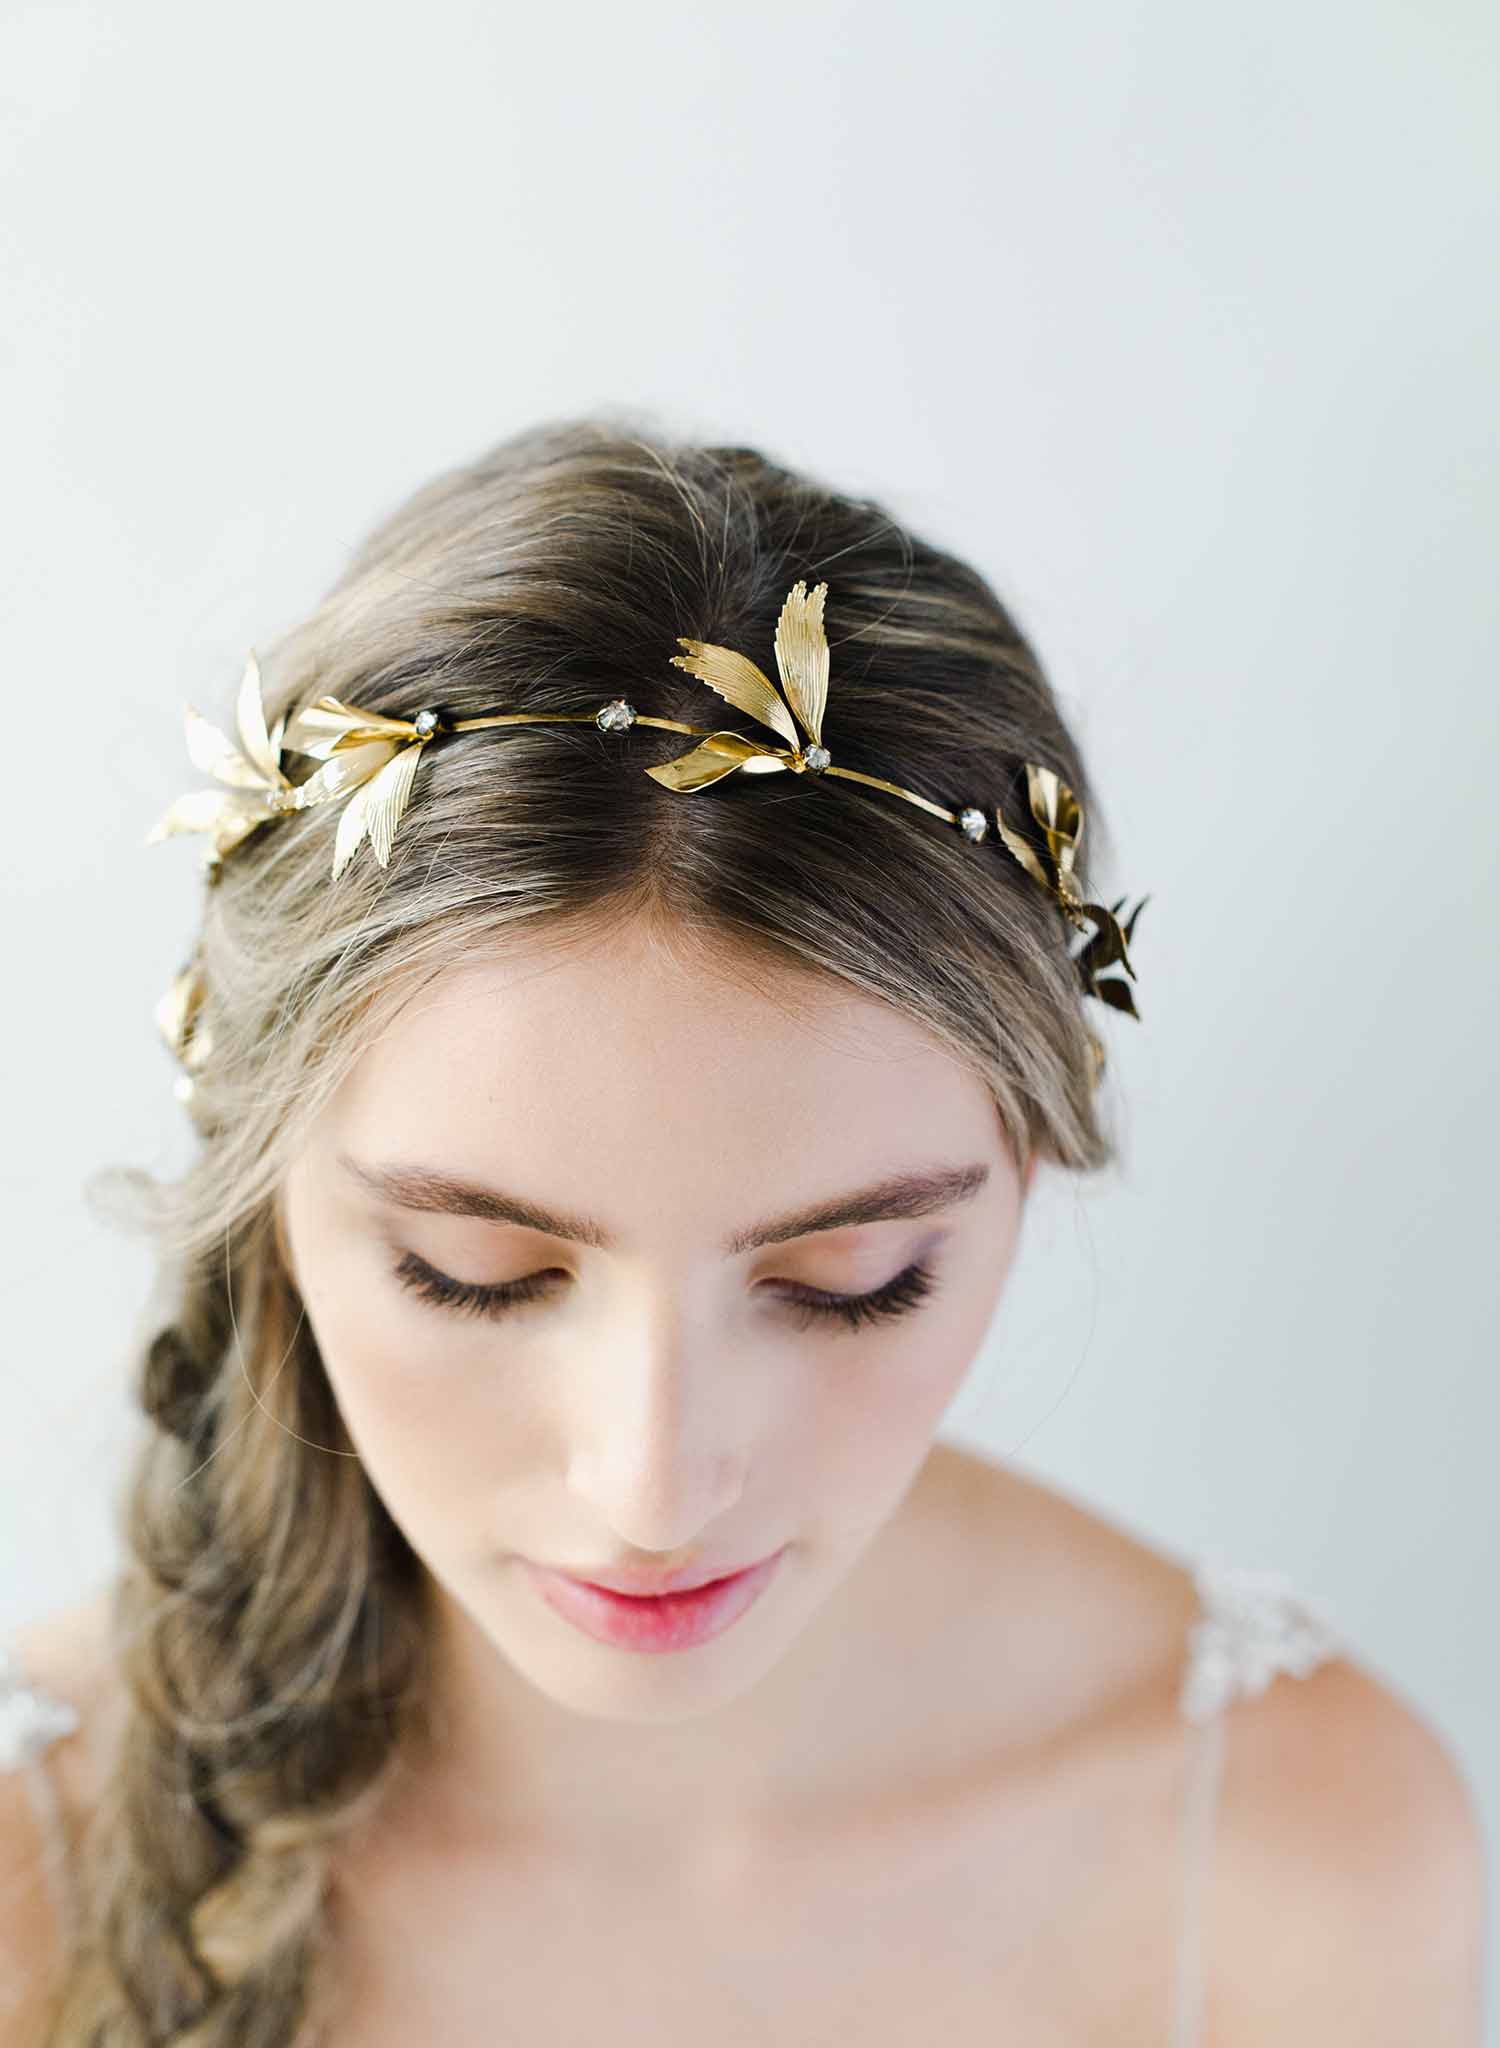 Gilded grecian wings headpiece - Style #2043